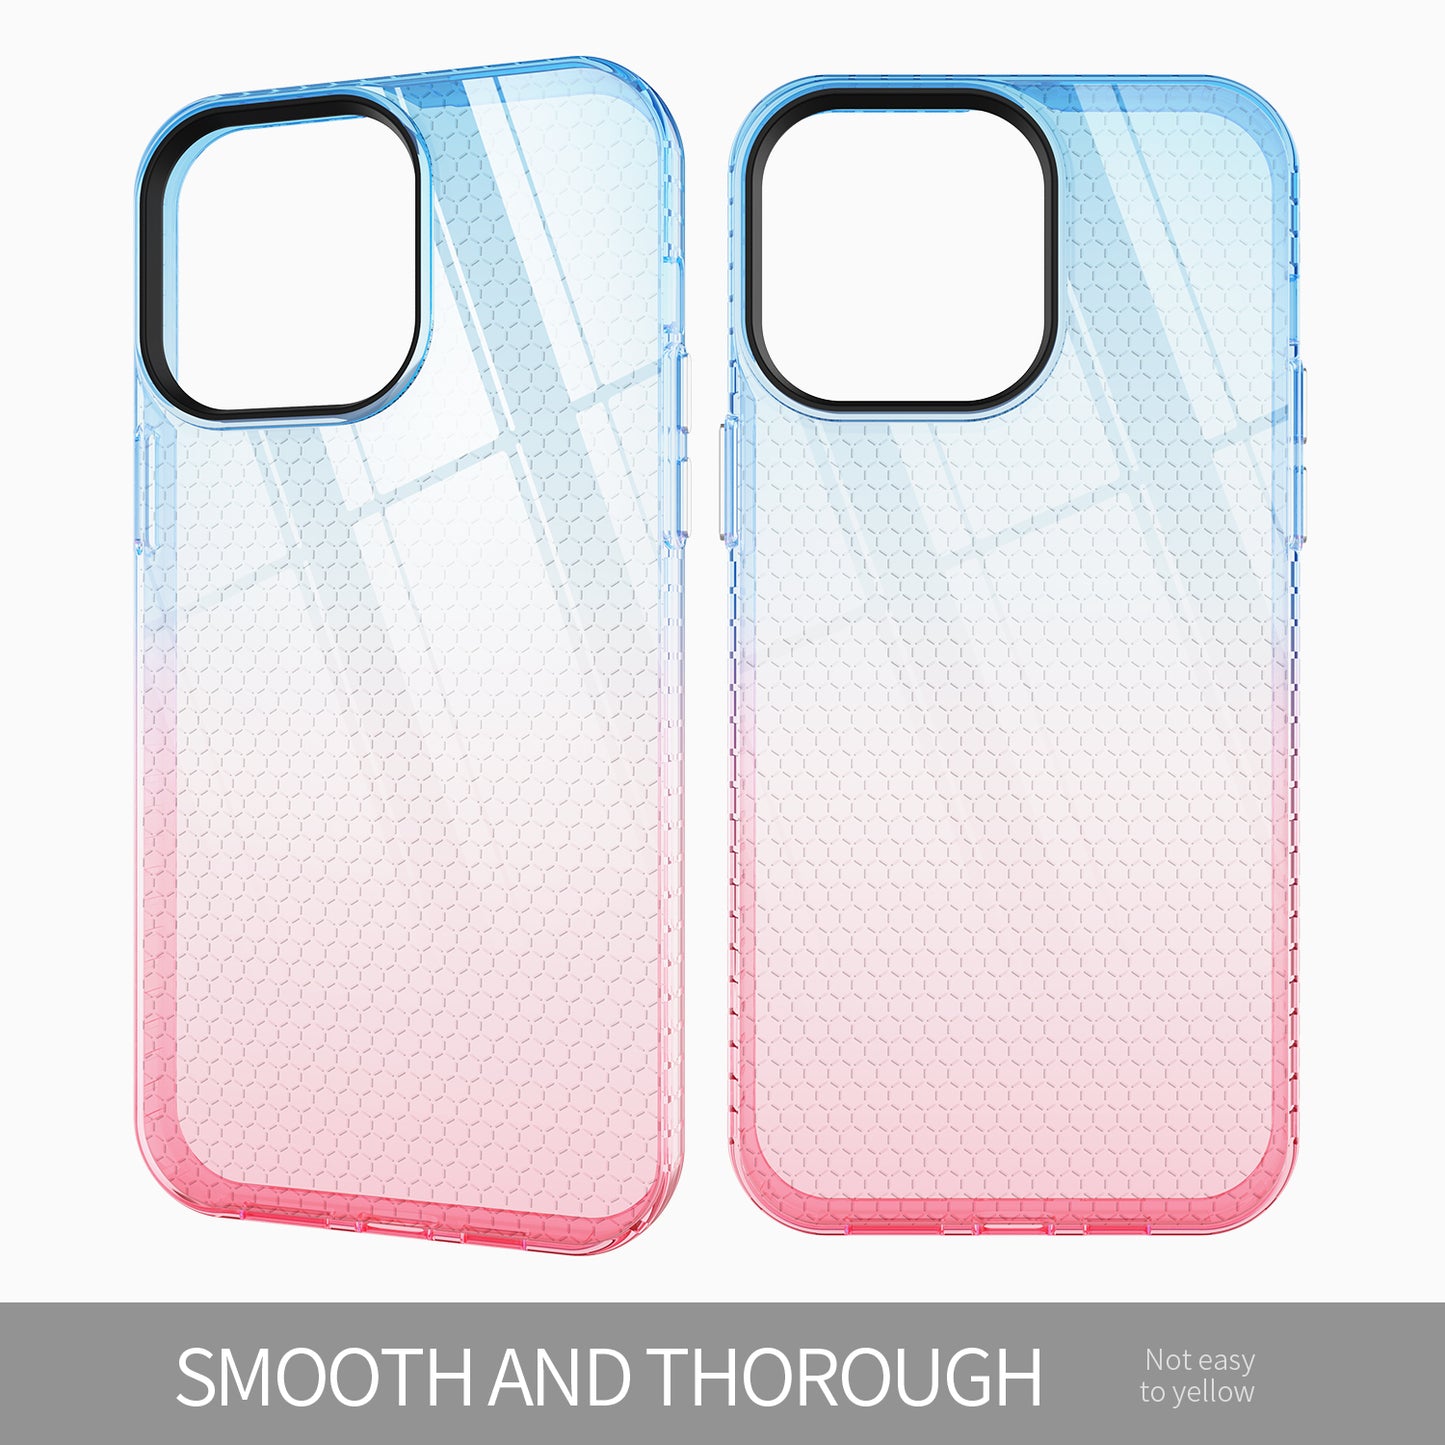 dual color nice popular designed phone case honeycomb pattern phone case for iphone 11 pro max